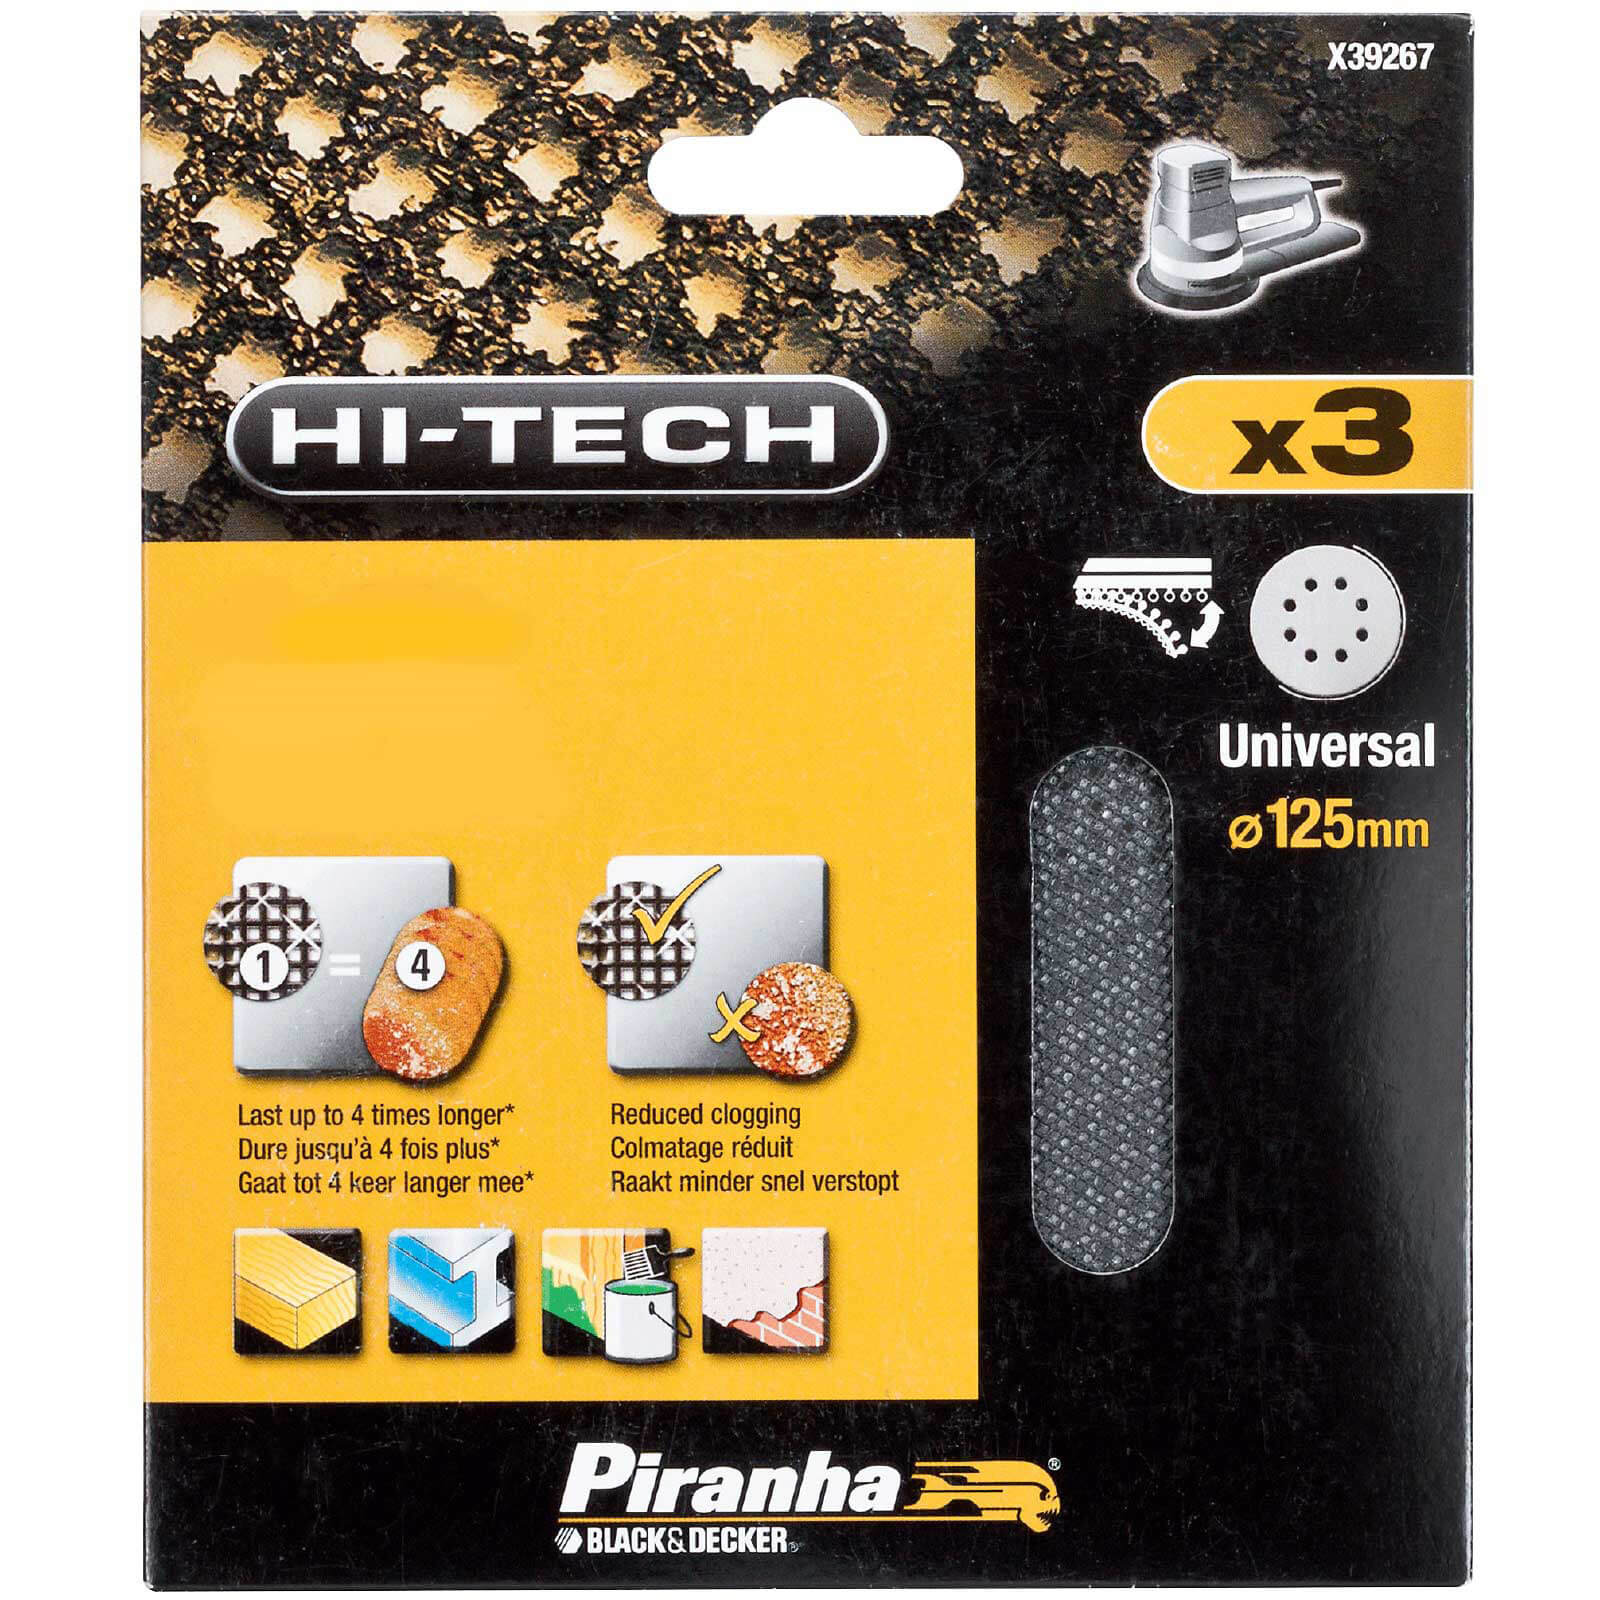 Image of Black and Decker Piranha Hi Tech Quick Fit Mesh ROS Sanding Sheets 125mm 125mm 120g Pack of 3